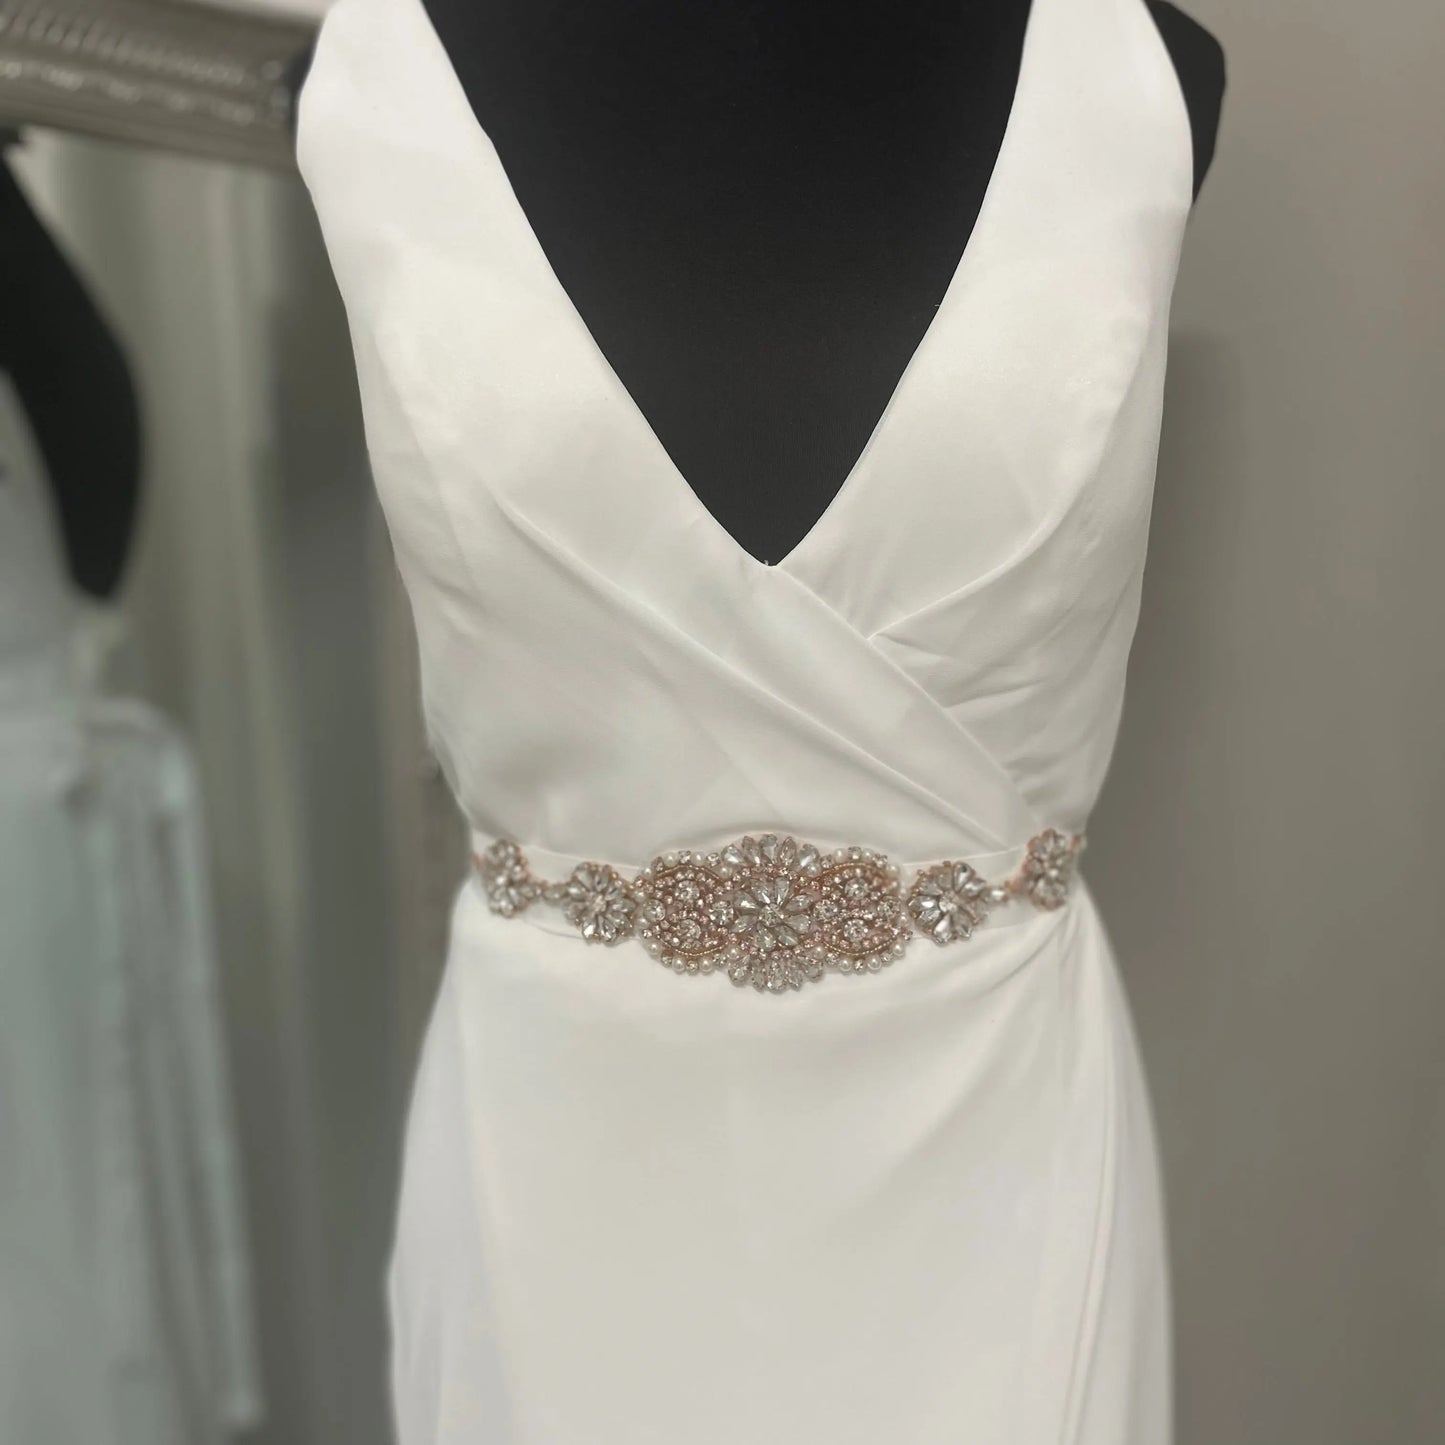 Front view of the Béa Brival Bridal Belt on a mannequin, showcasing its elegant design with pearls and Diamontes, an exquisite accessory for any bride.